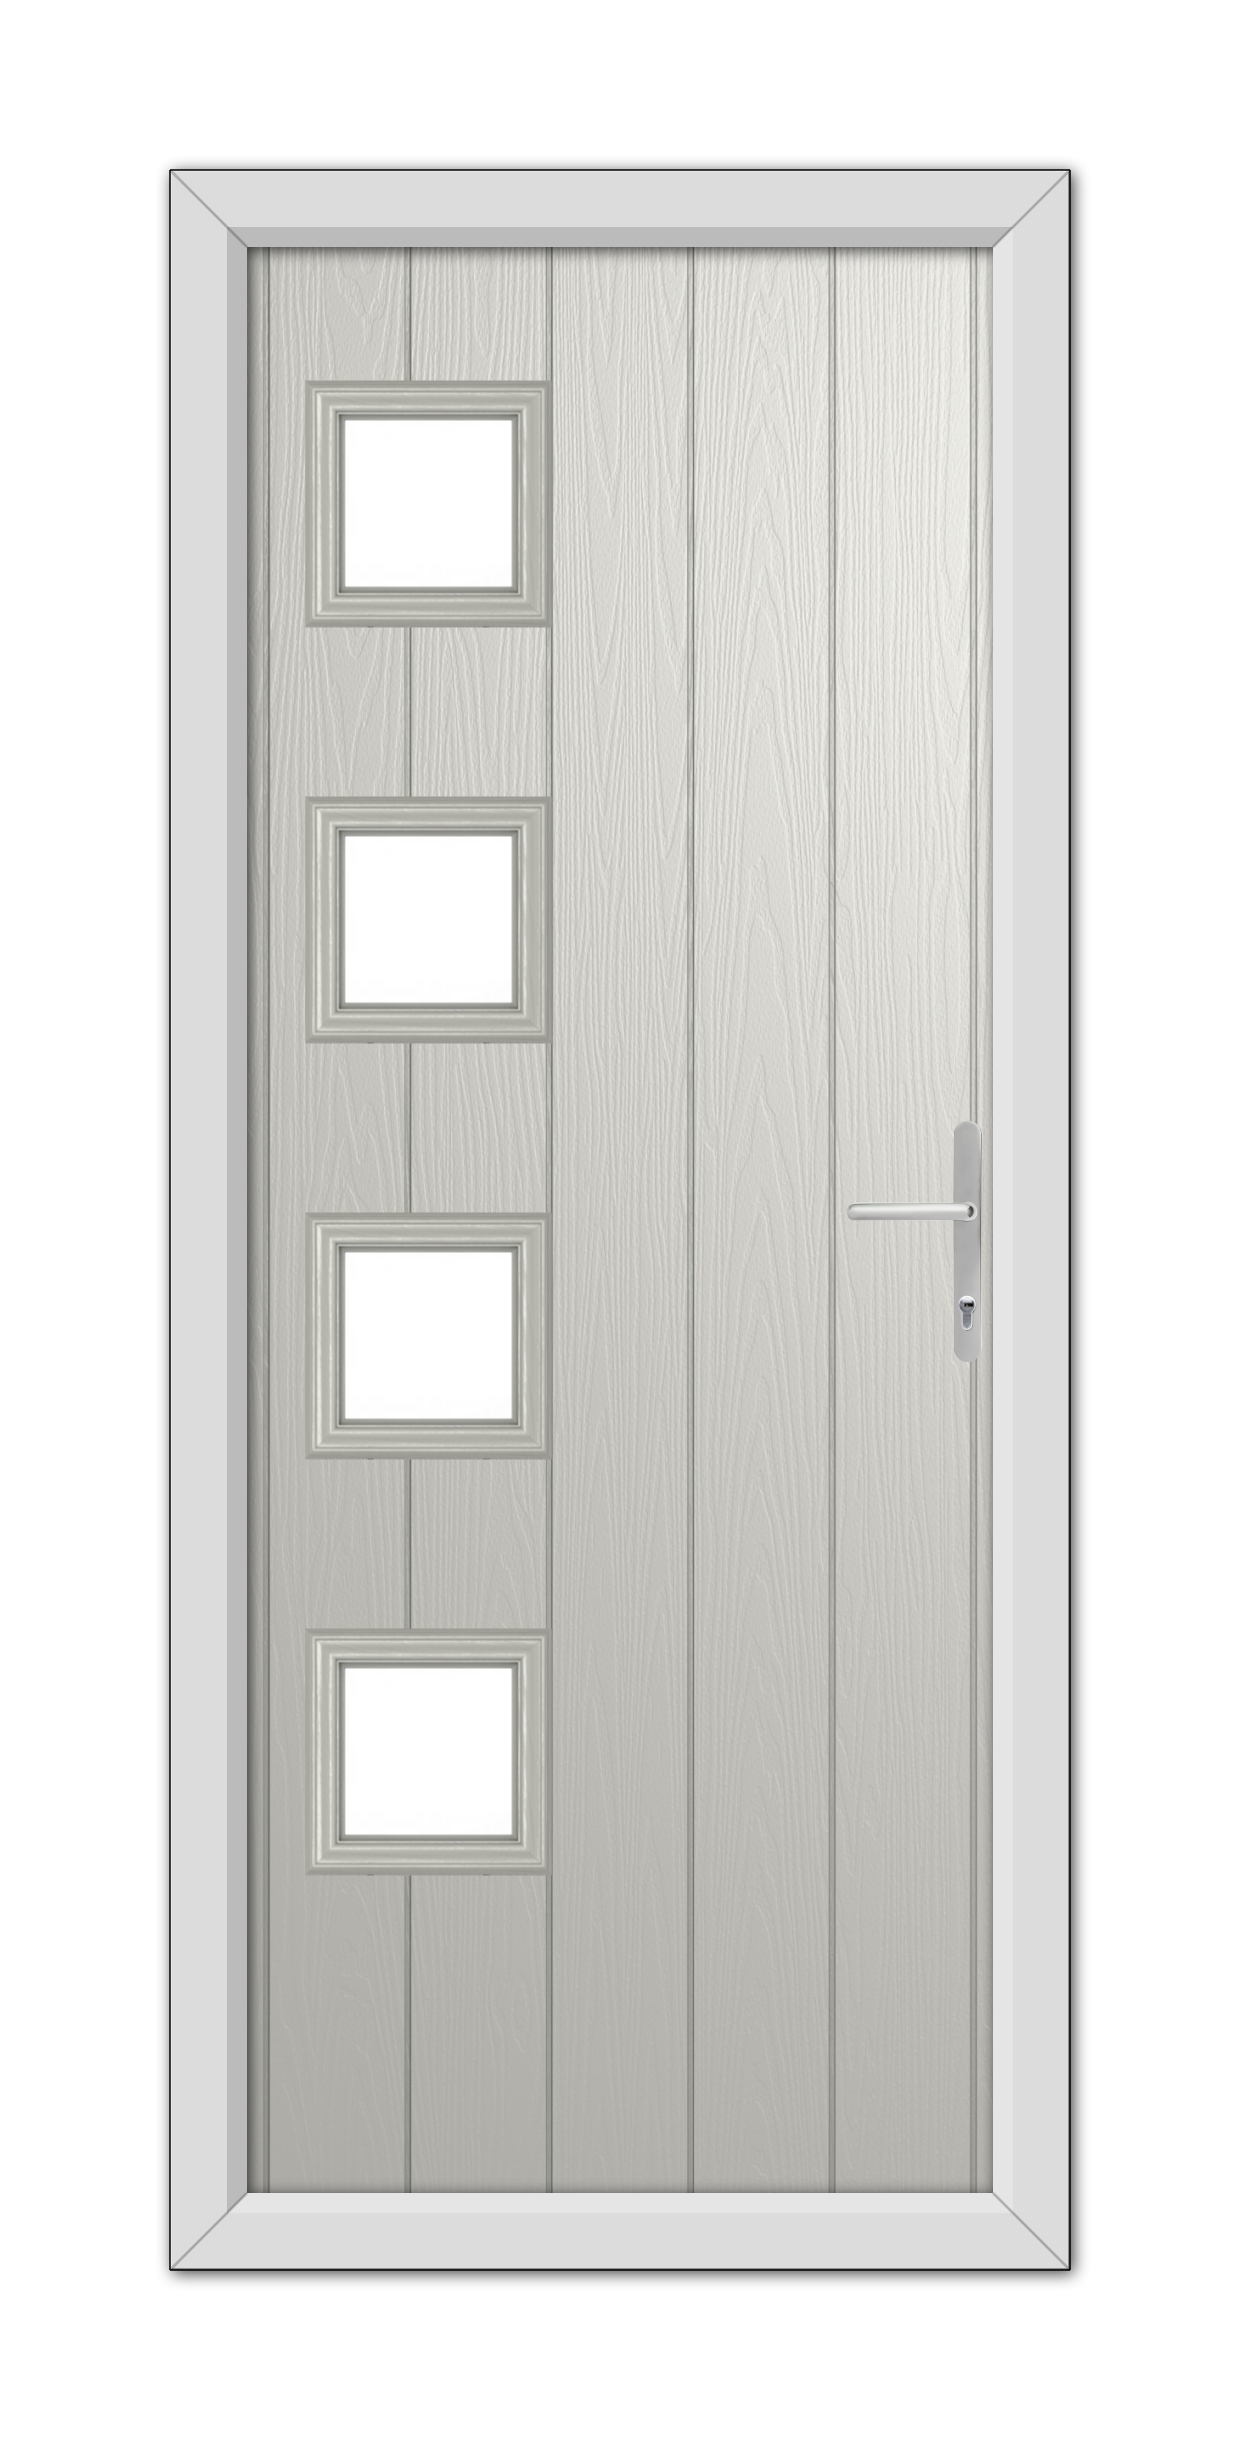 A modern Agate Grey Sussex Composite Door 48mm Timber Core with four rectangular glass panels aligned vertically on the left side and a metallic handle on the right.